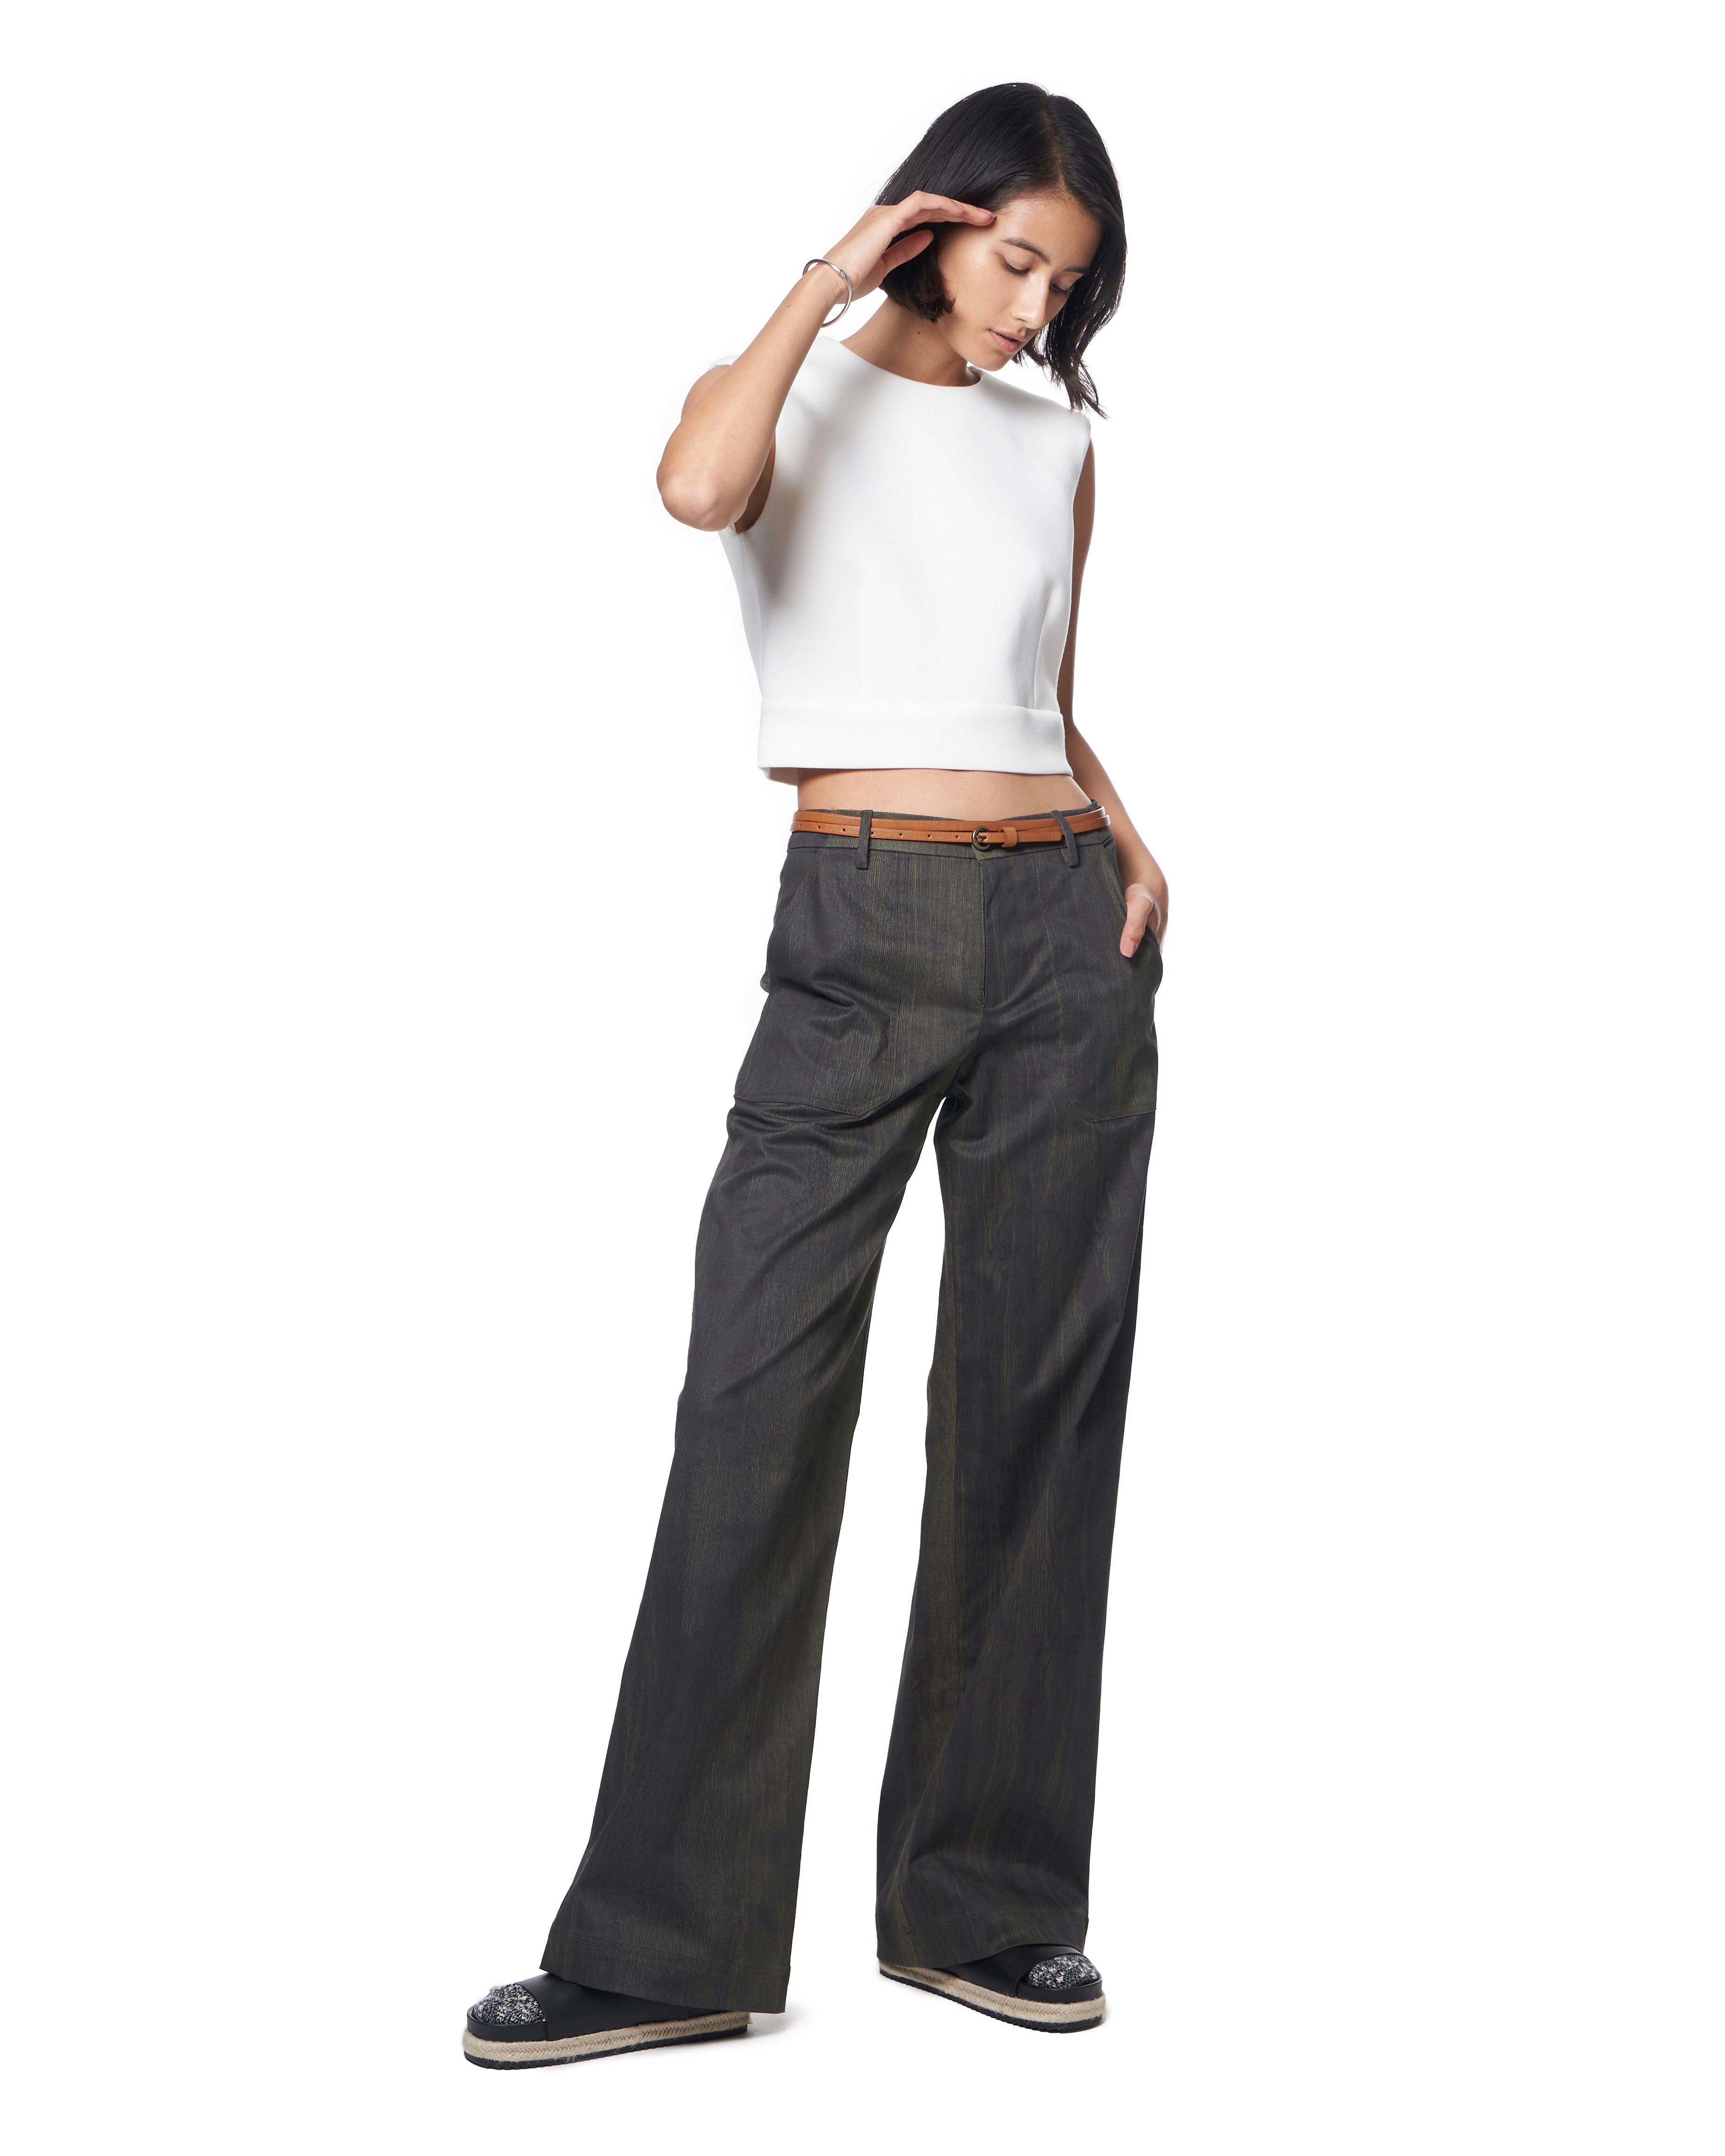 Tracee Pant | Olive Grain